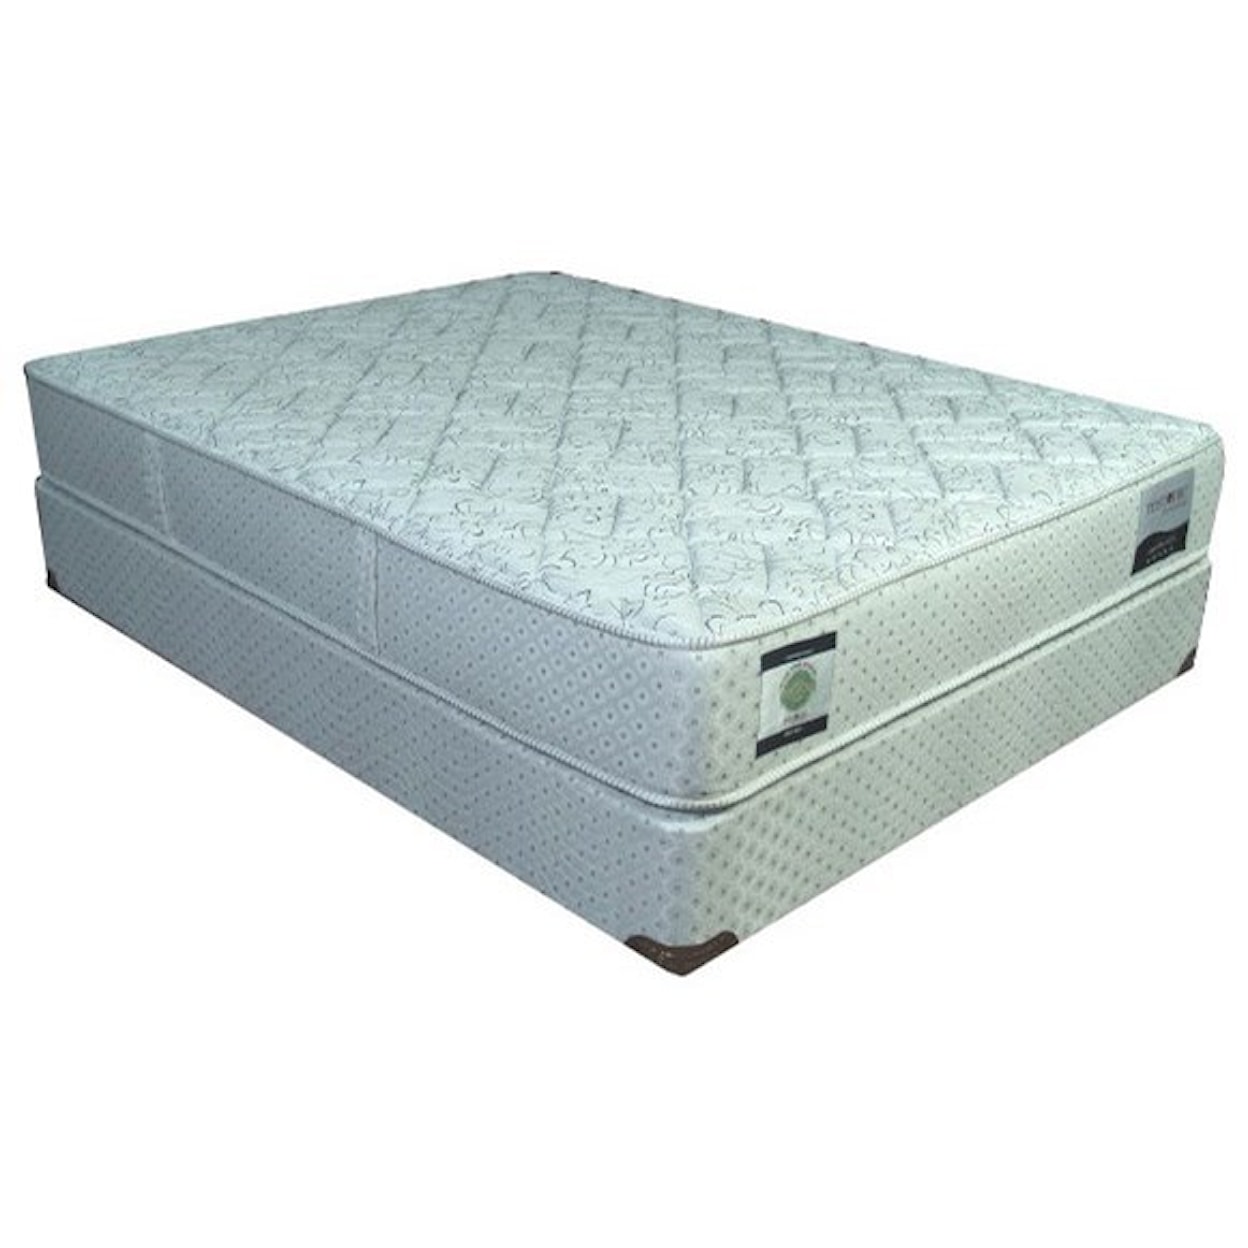 Restonic CC Linwood Firm Twin 12" Firm Two Sided Mattress Set